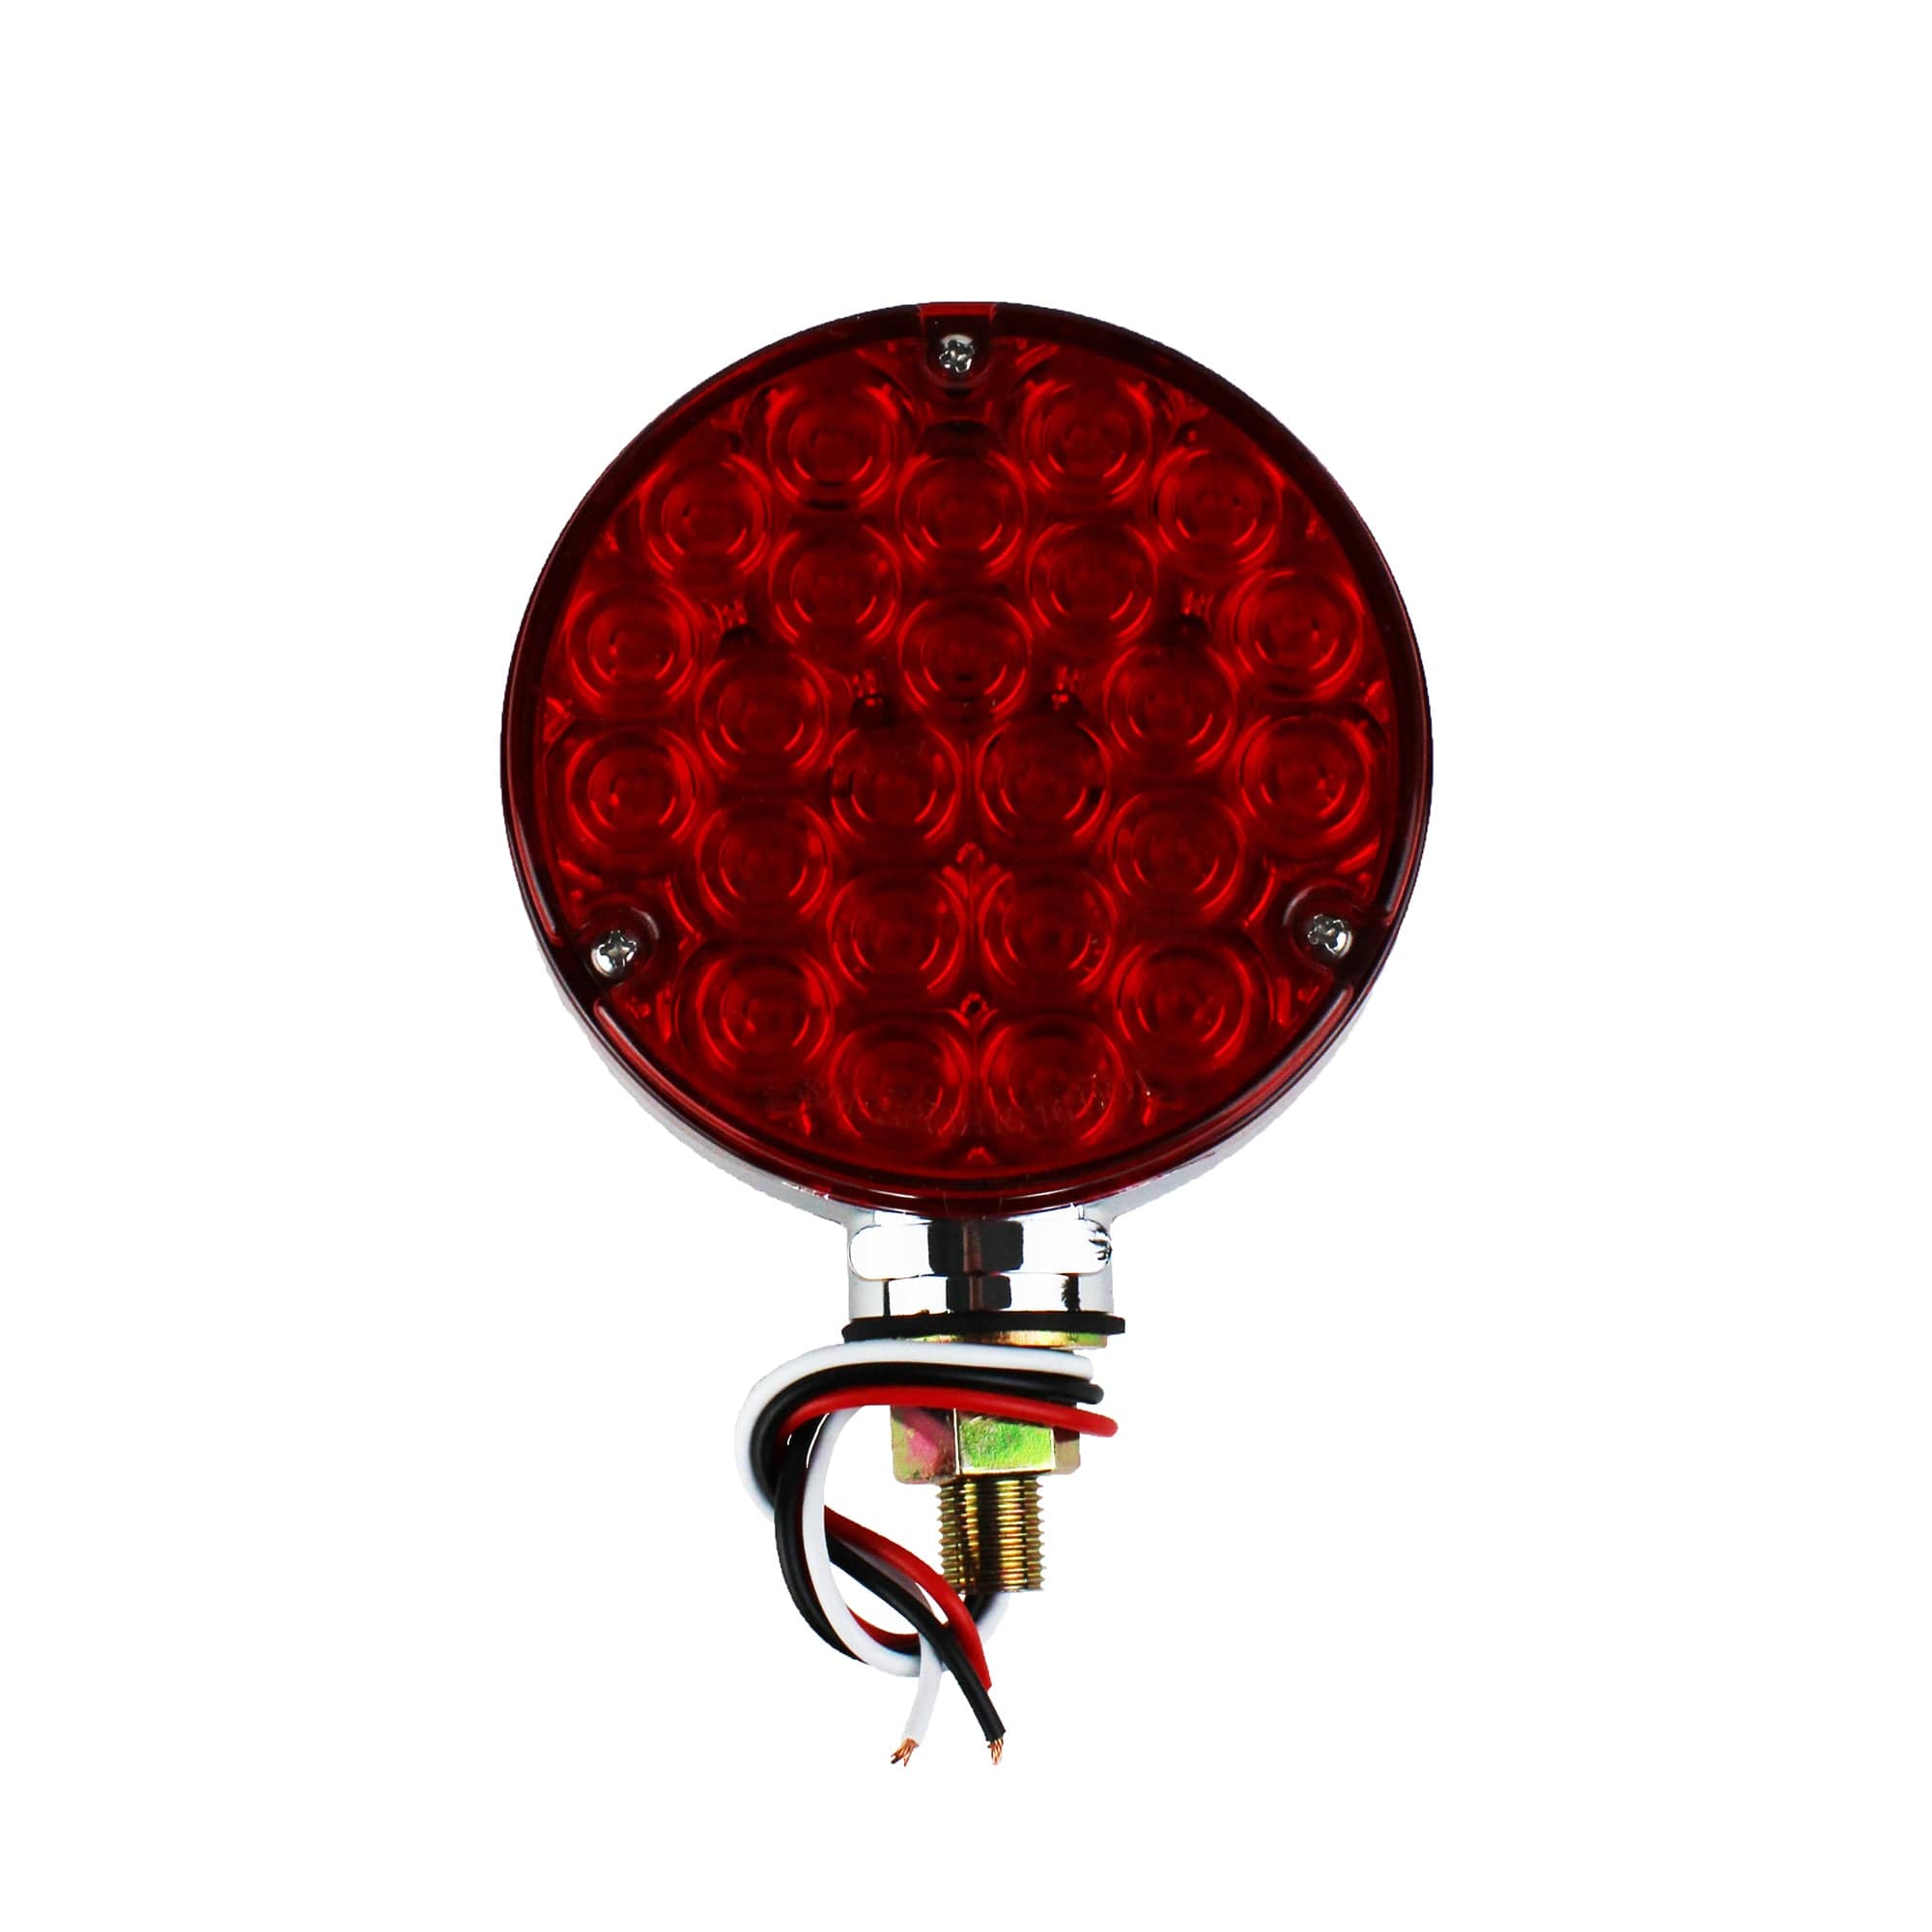 Anderson Marine / Peterson MFG V338-2 4.20" Round, Double-Face, Amber/Red LED Park/Turn Taillight